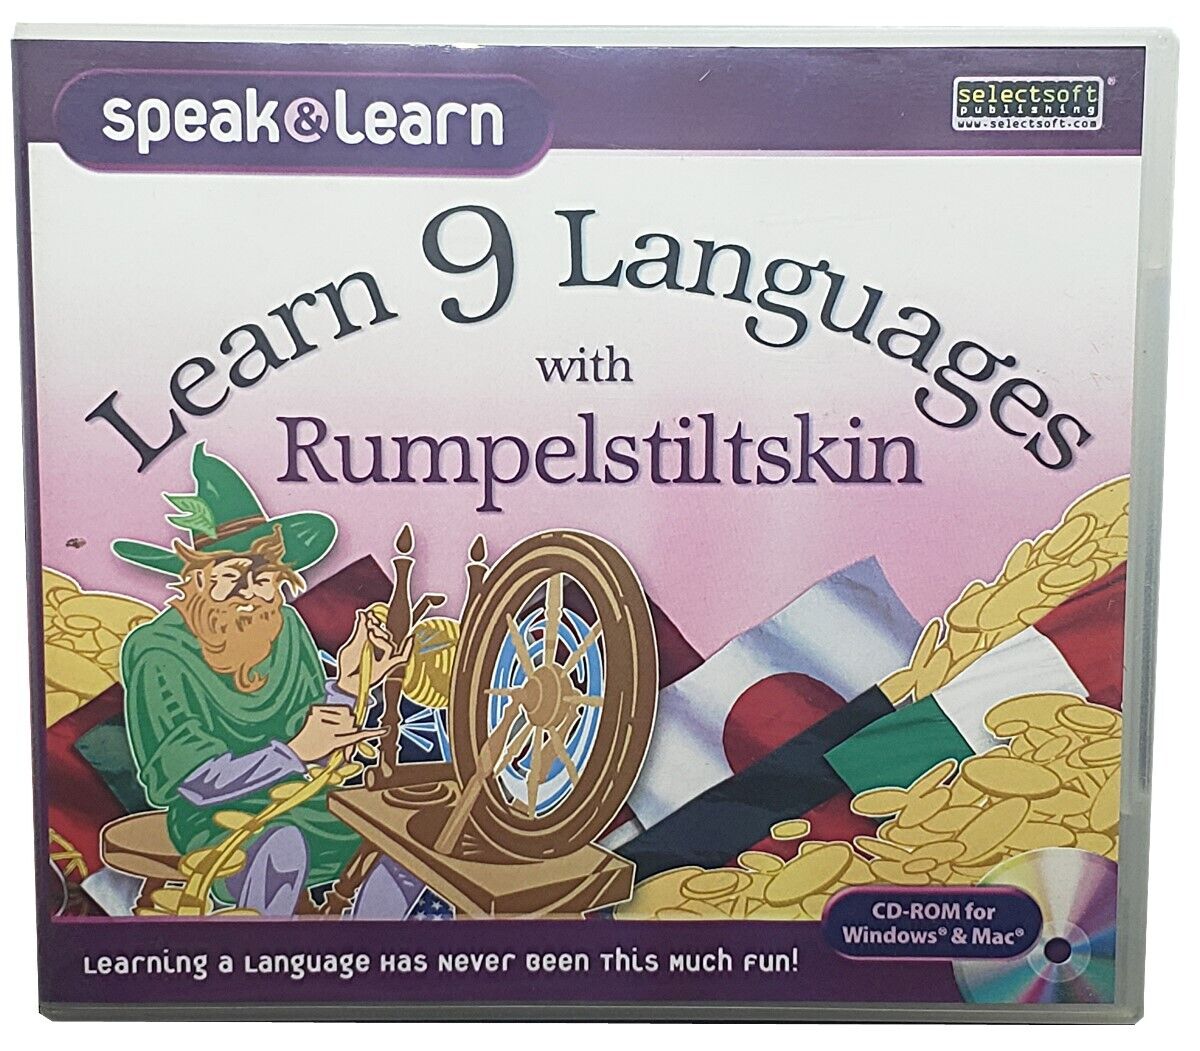 Learn 9 Languages with Rumpelstiltskin - Multilingual Stories PC Software Sealed